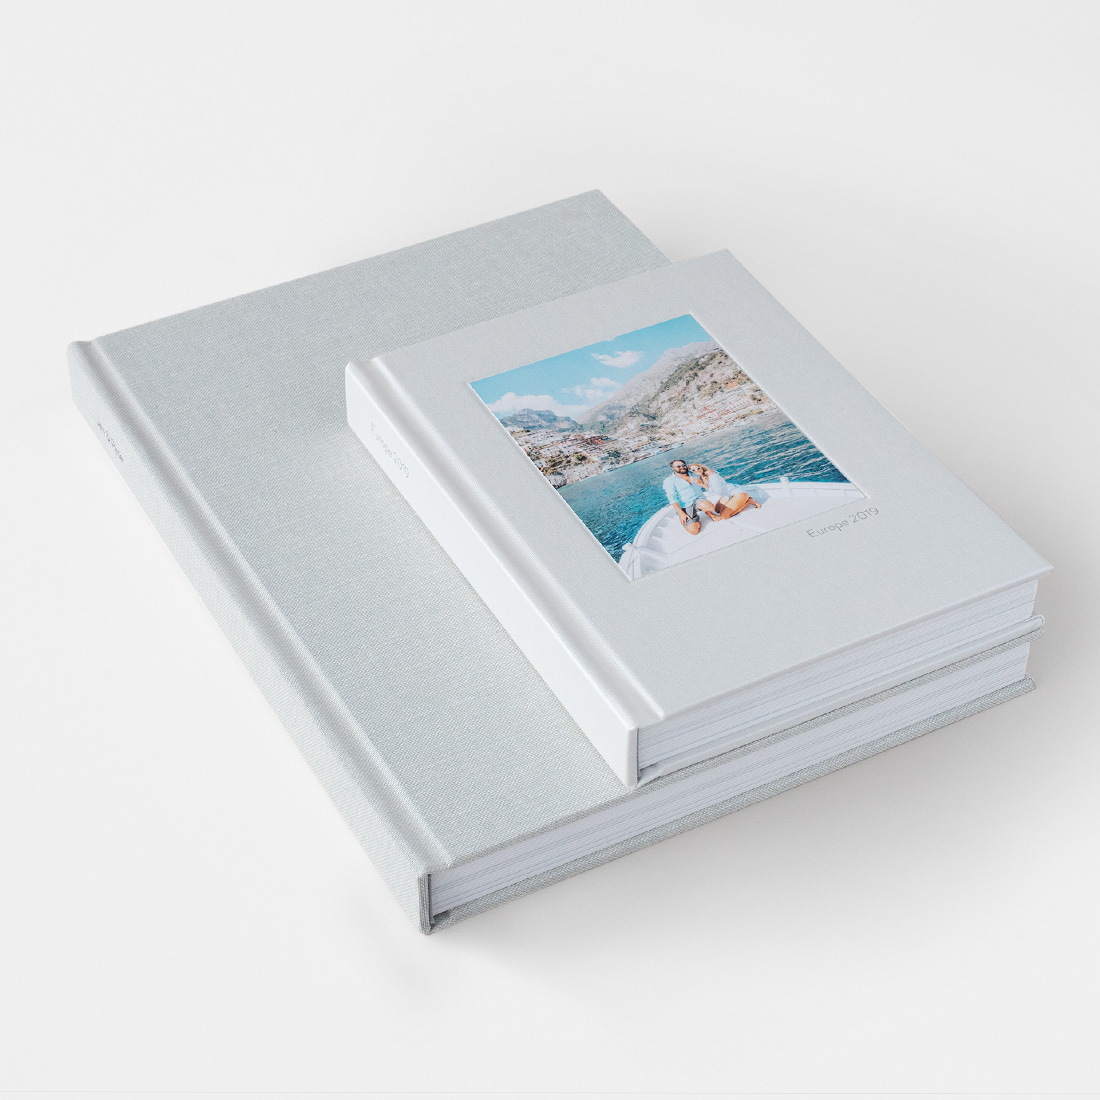 Print File ALB-SB premium standard size album for S-Series and Print pages 